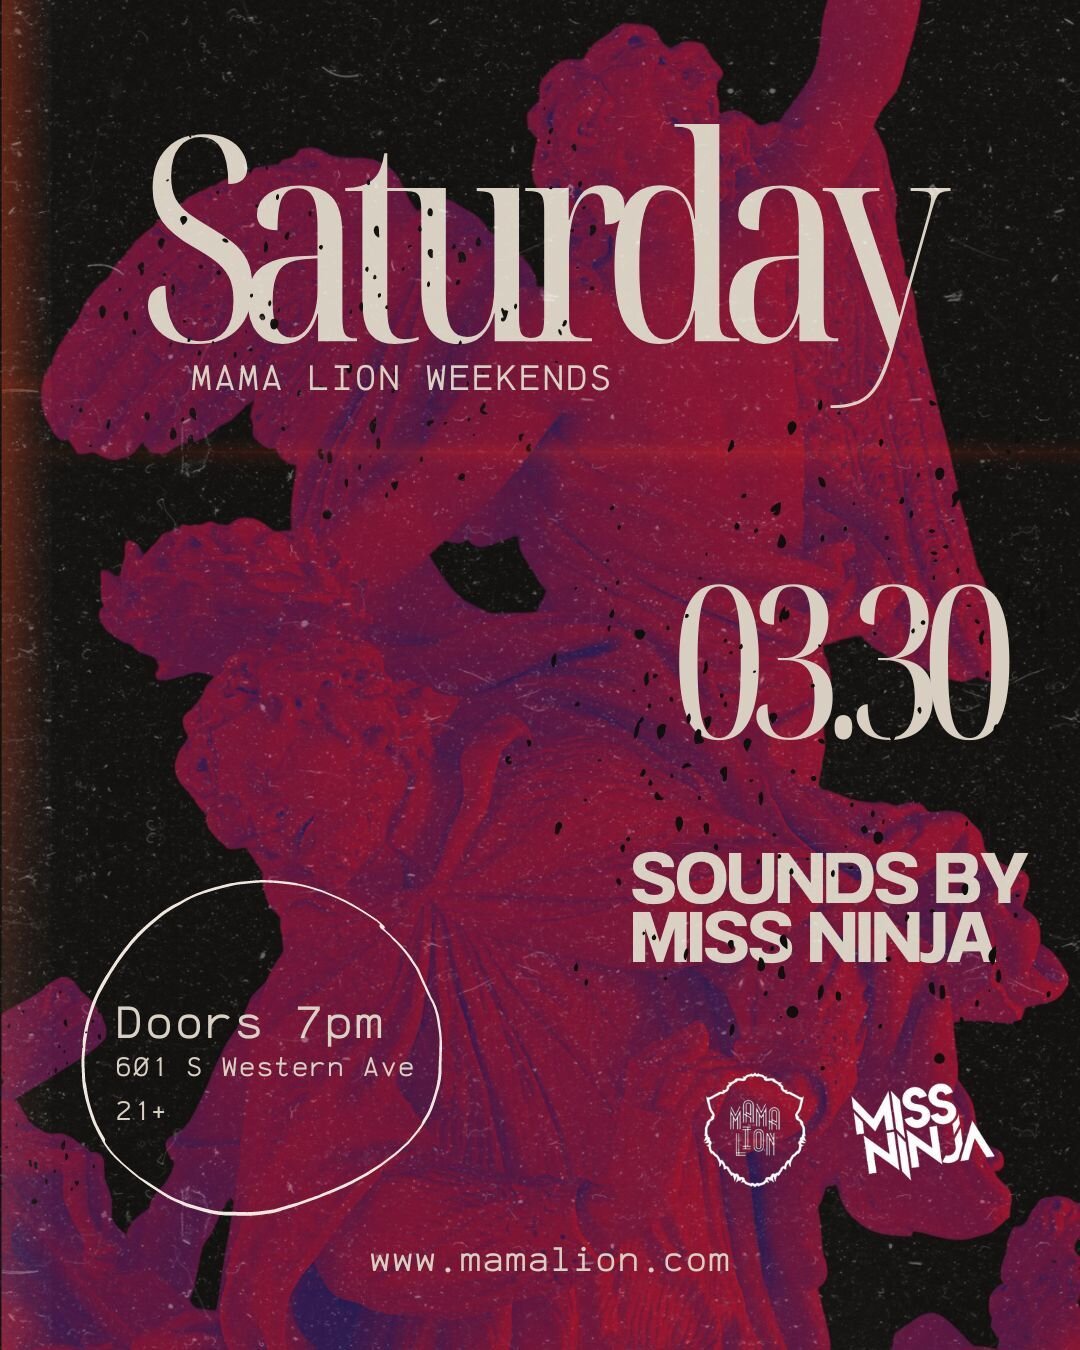 Saturday's agenda 📍 601 S Western Ave 🍸 With Sounds by @djmissninja 

For Reservations &amp; Info
www.mamalion.com

Cocktail Hours 7pm
DJs 10pm till Late

See you there ❤️